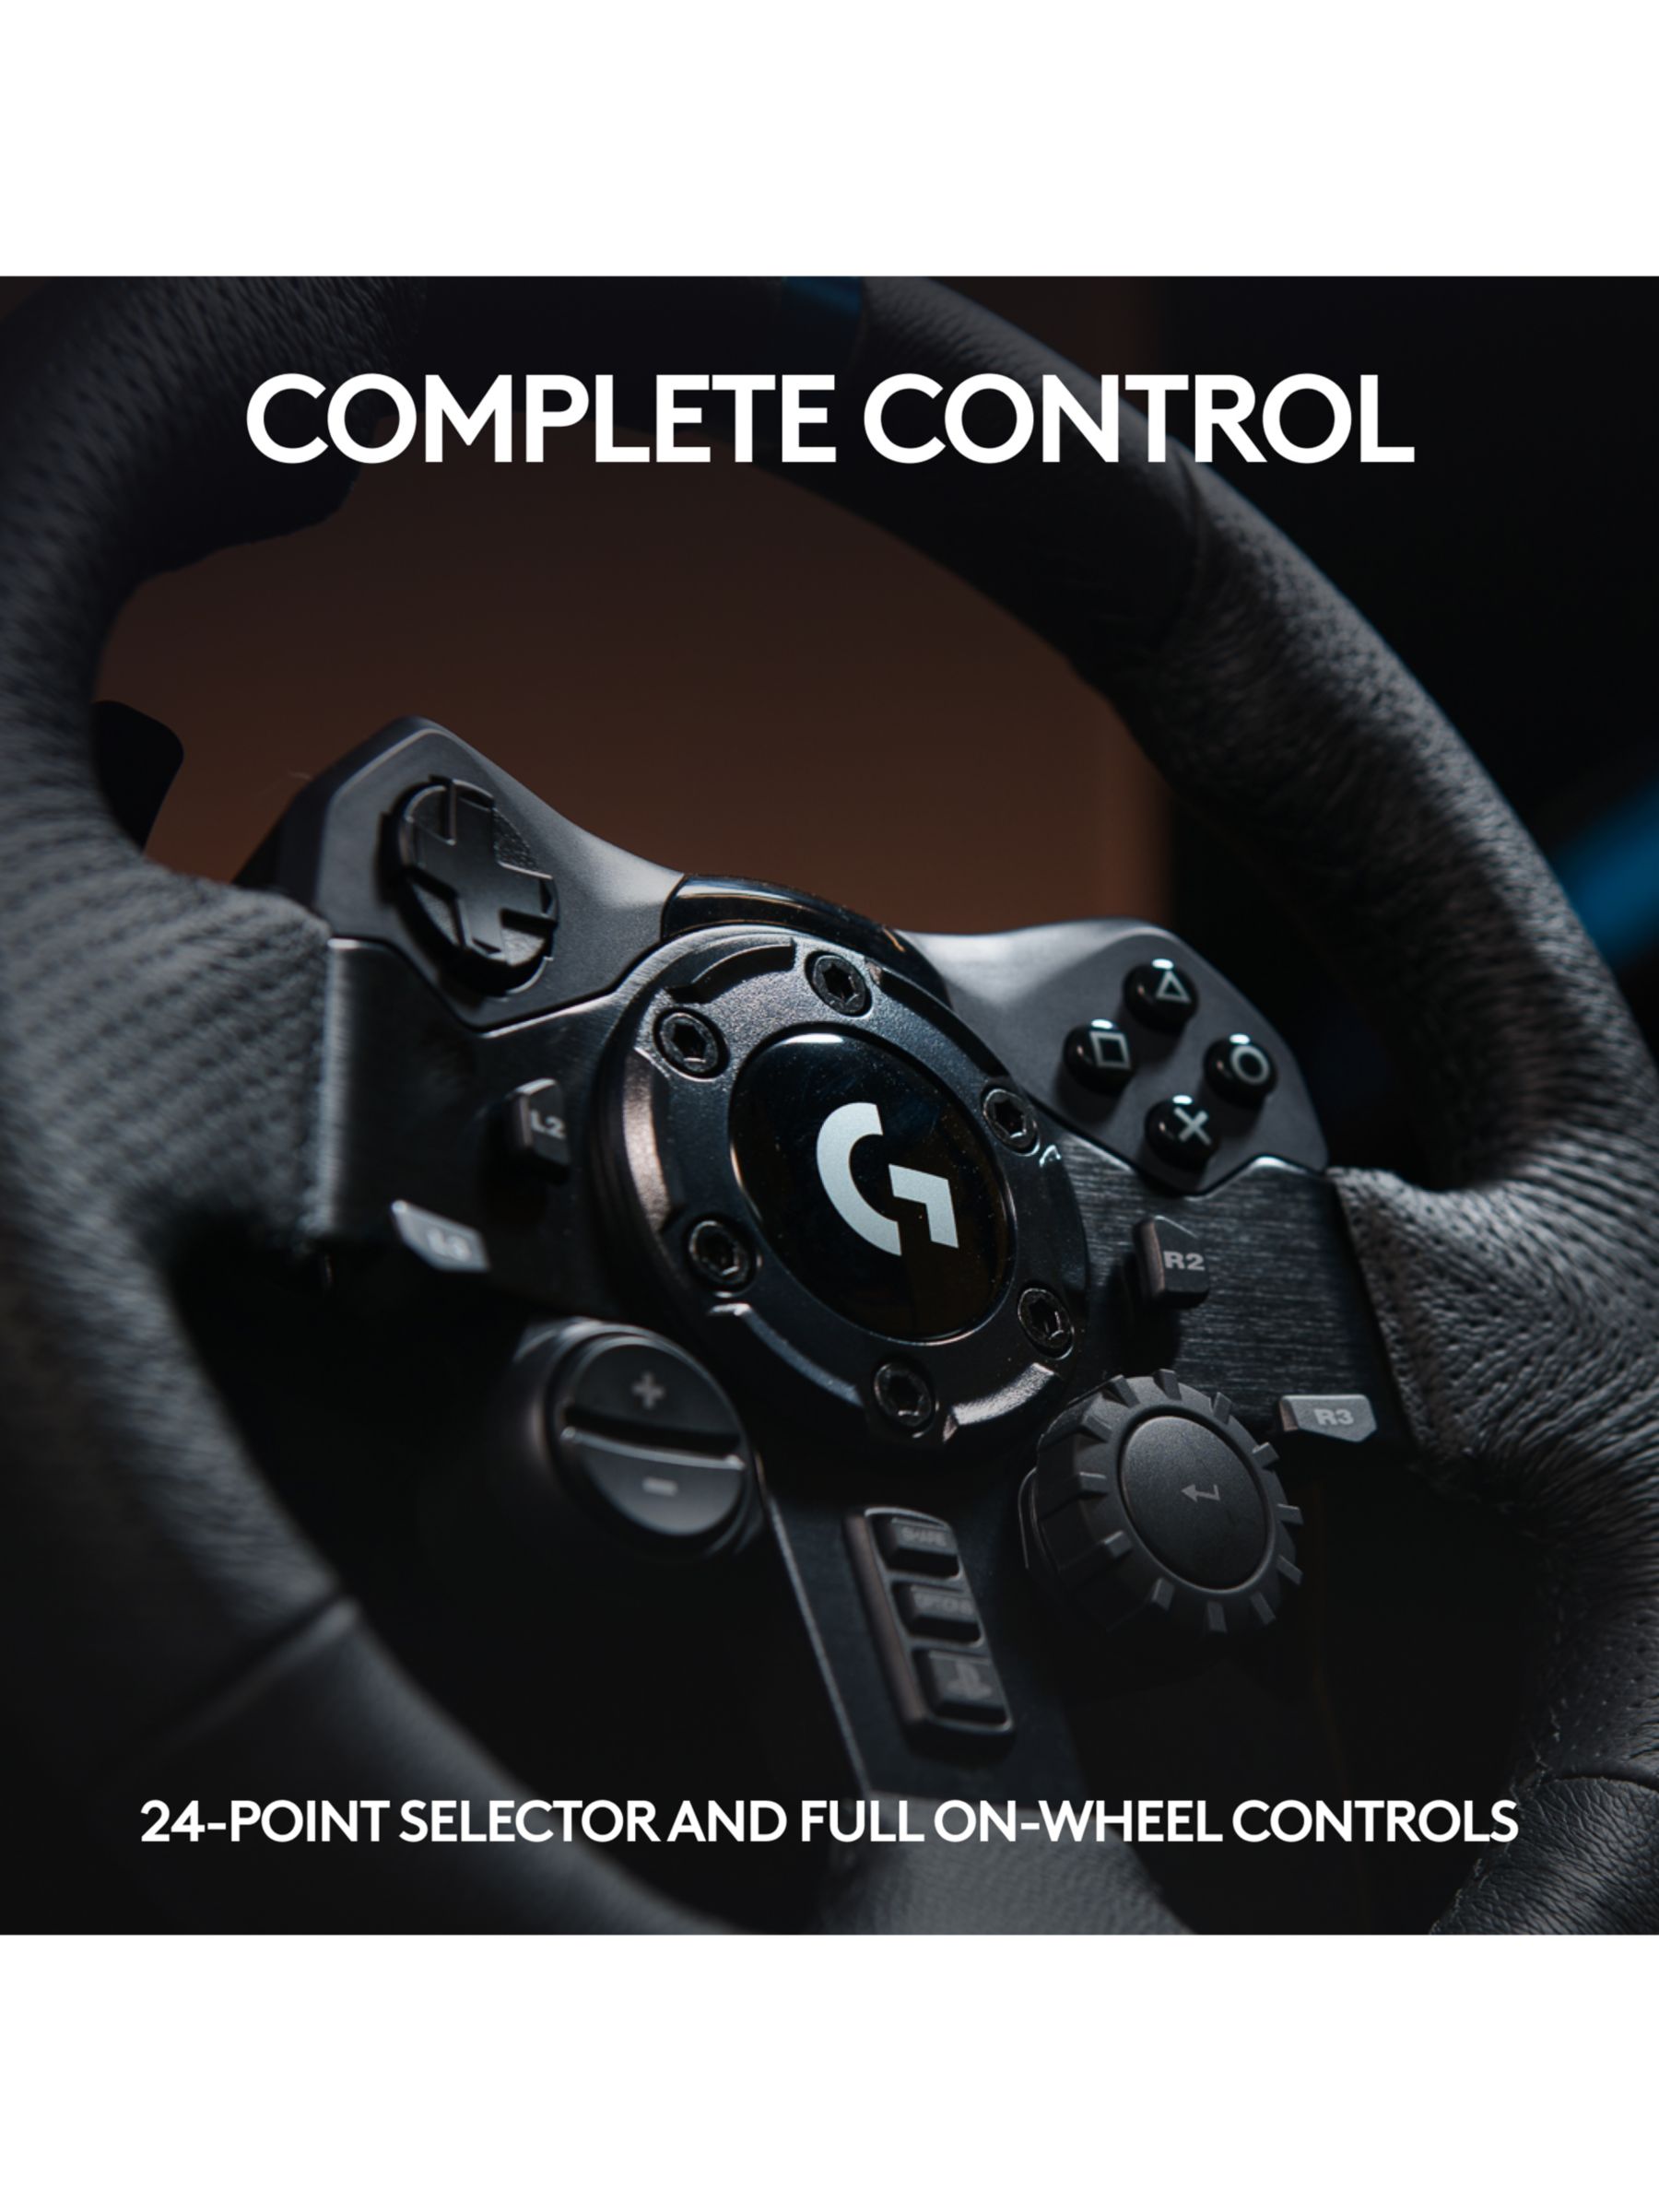 G923 TRUEFORCE Racing wheel for Xbox, PlayStation and PC